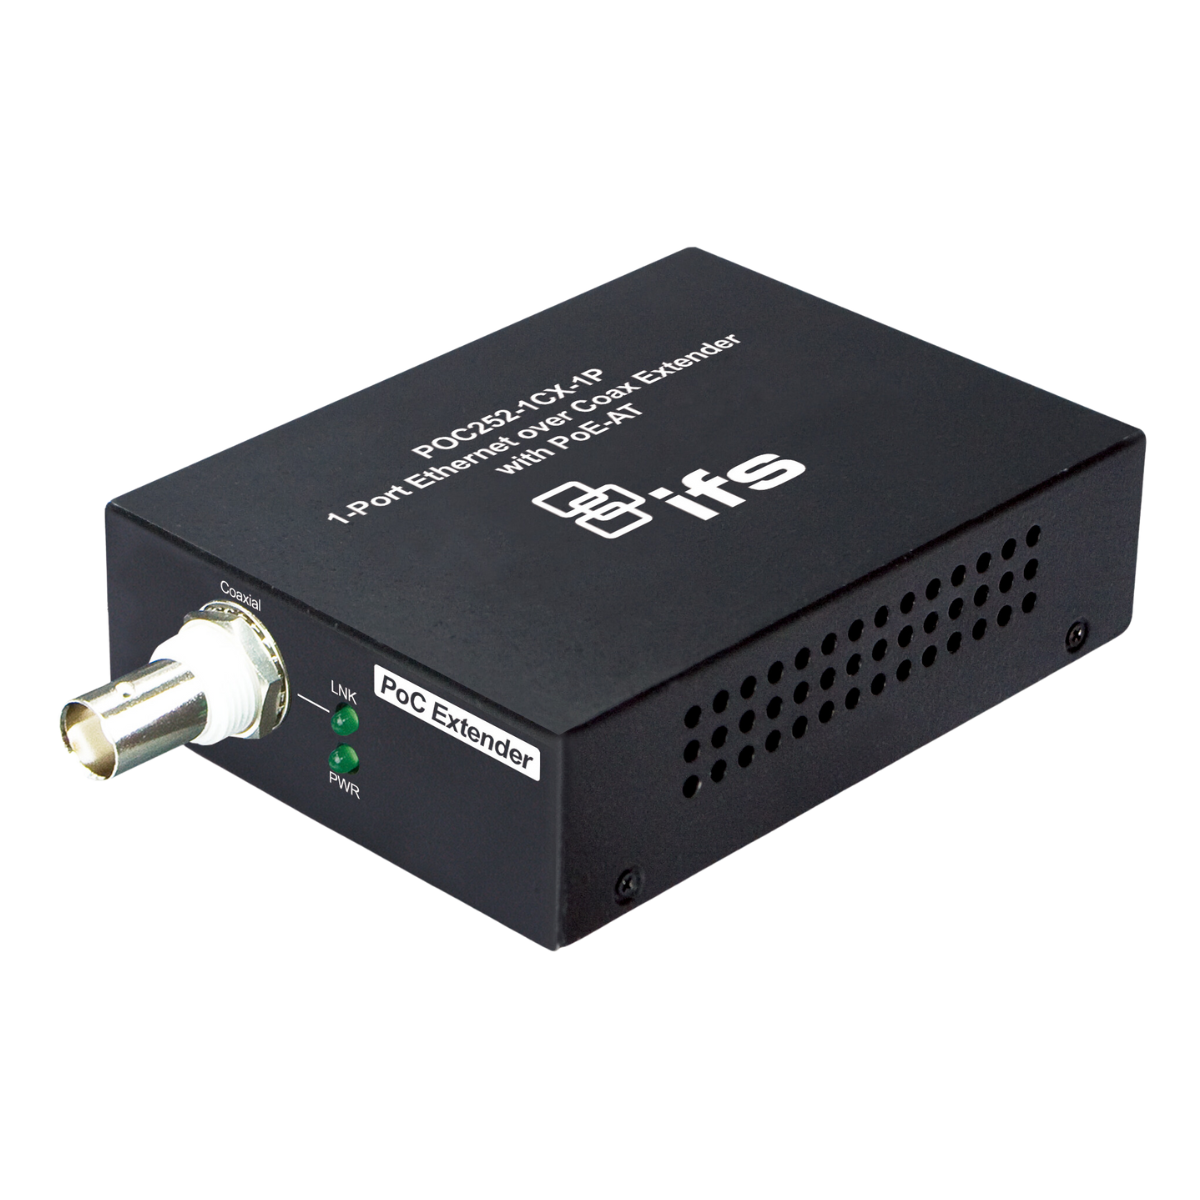 1-Port Power and IP over coax with PoE-AT - to be used in conguntion with the IP over coax (POC Series) network switches and media convertor.(Camera end)